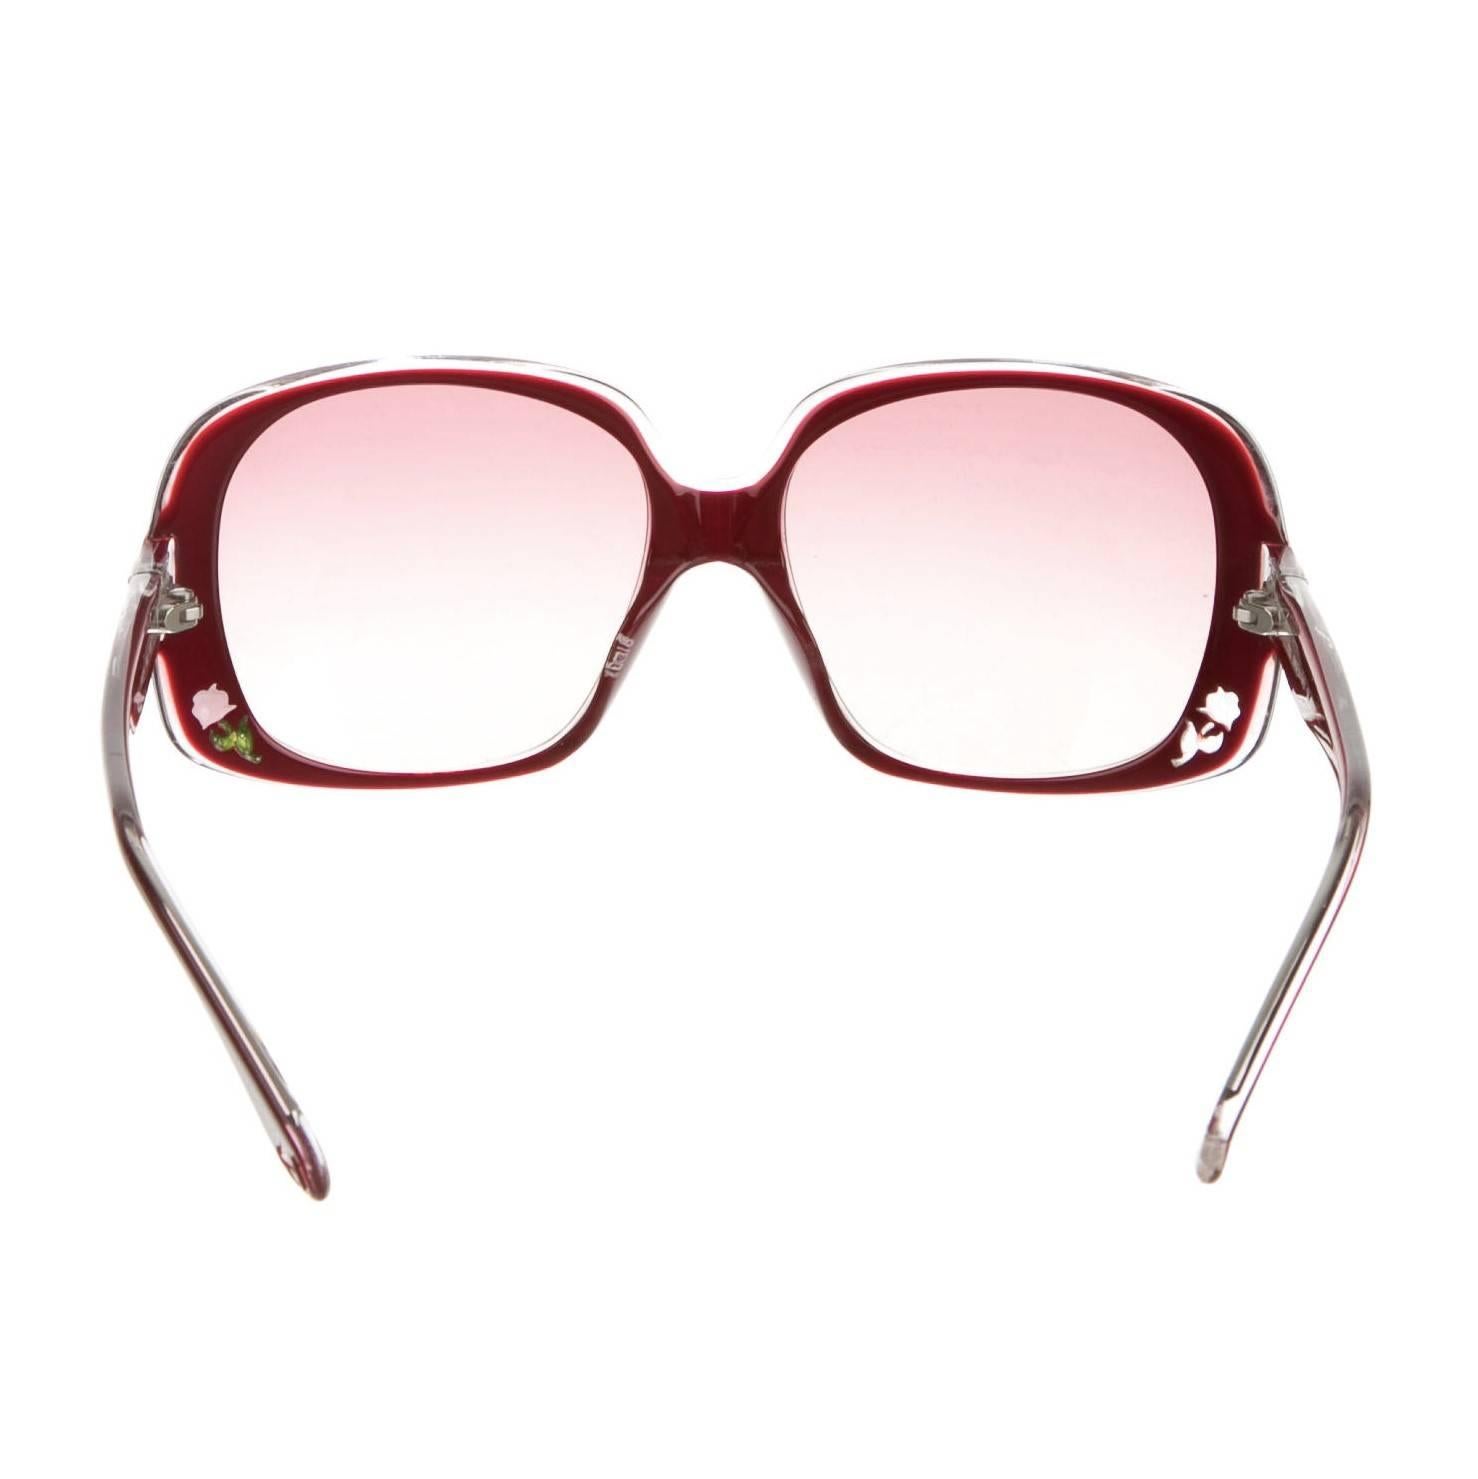 New Fendi Deep Red Rose Inlaid Sunglasses With Case 11